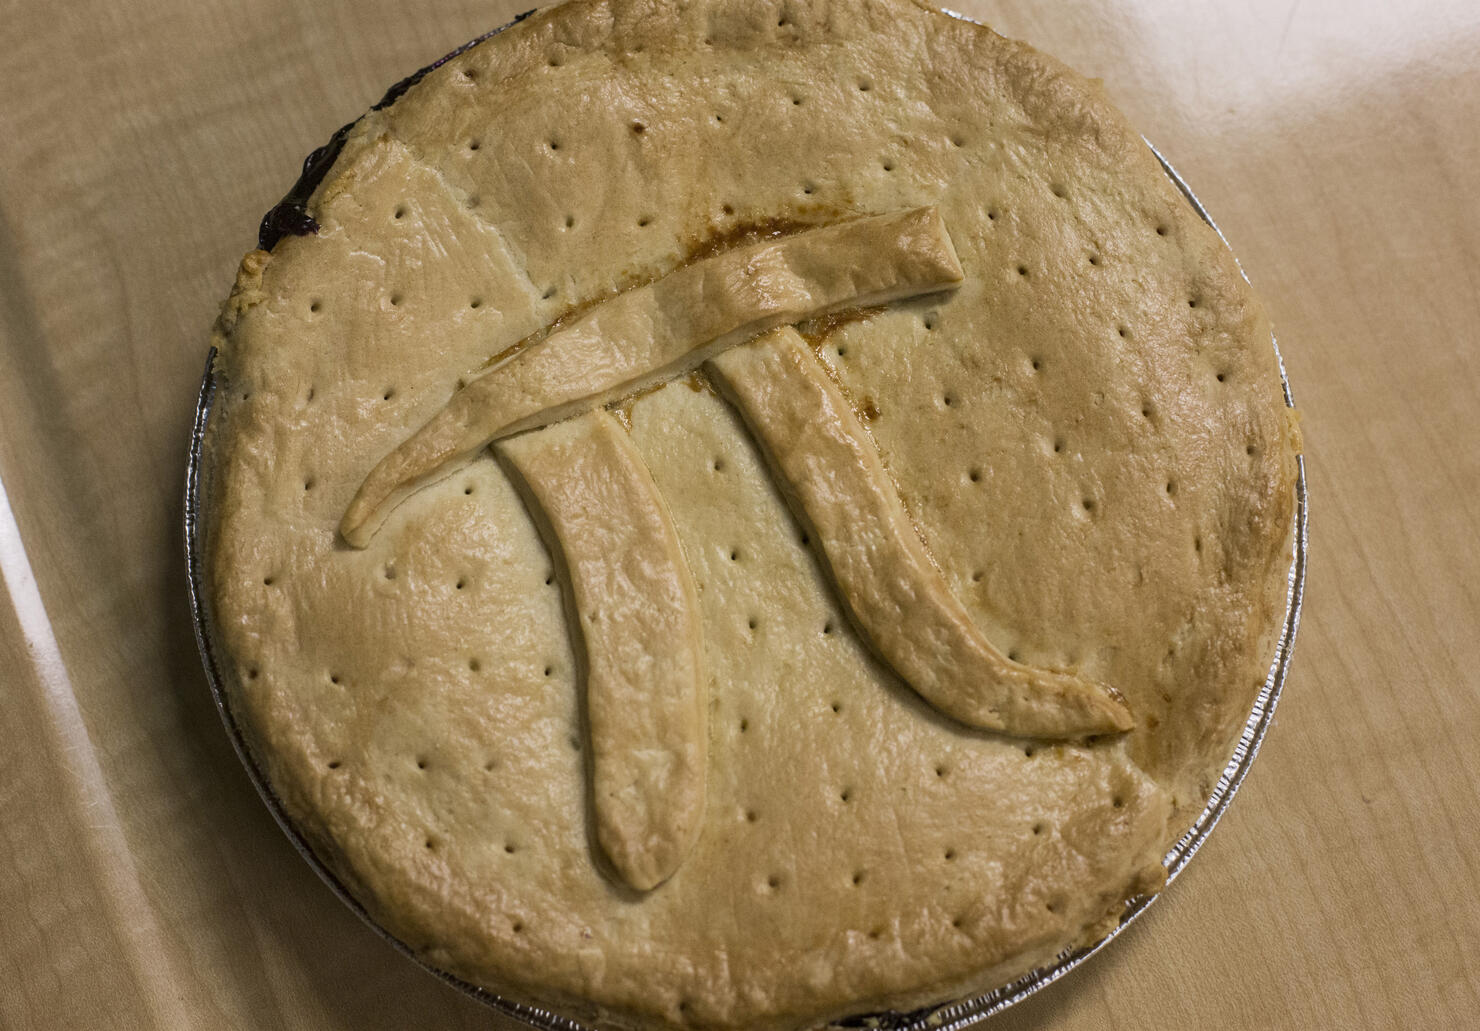 National Pi Day! Here’s where to get freebies and deals on pizza, pie today